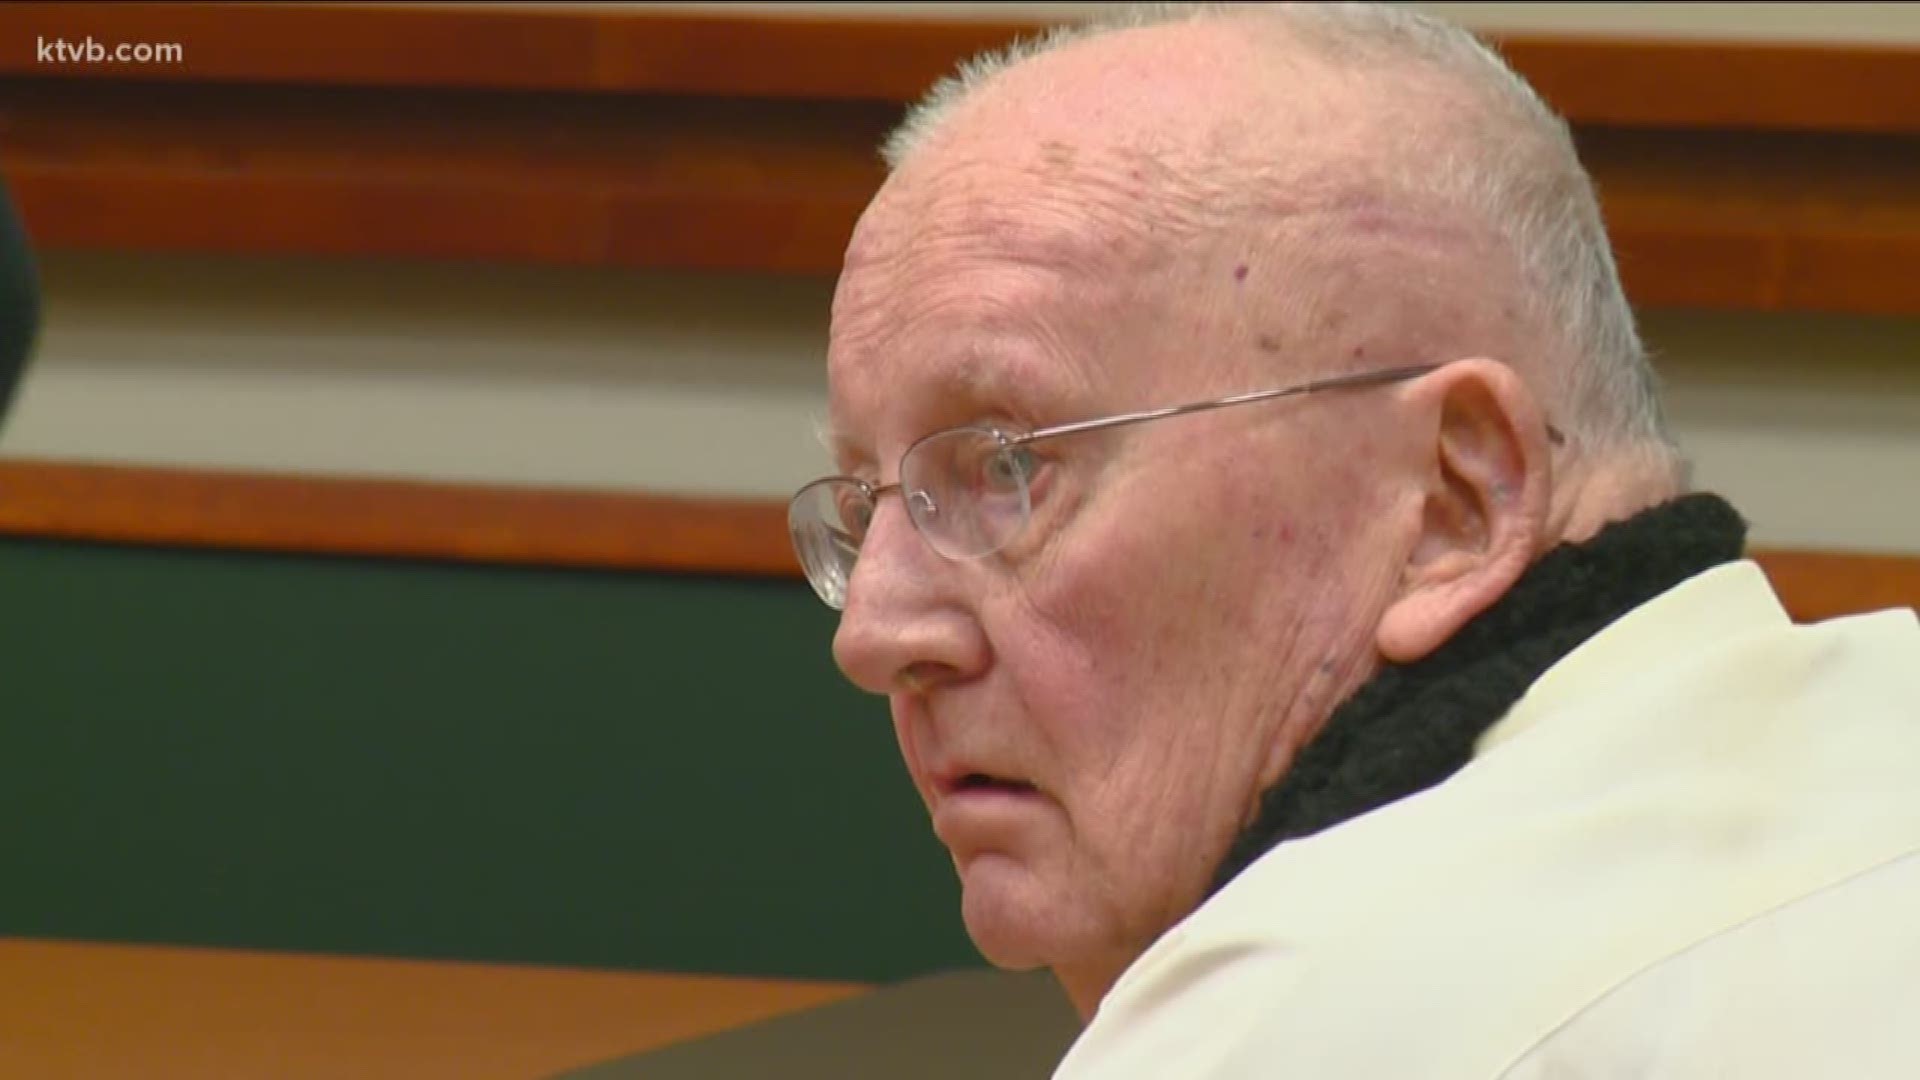 Father W. Thomas Faucher will plead guilty to two counts of distribution of child porn and additional counts involving possession of child porn and LSD.